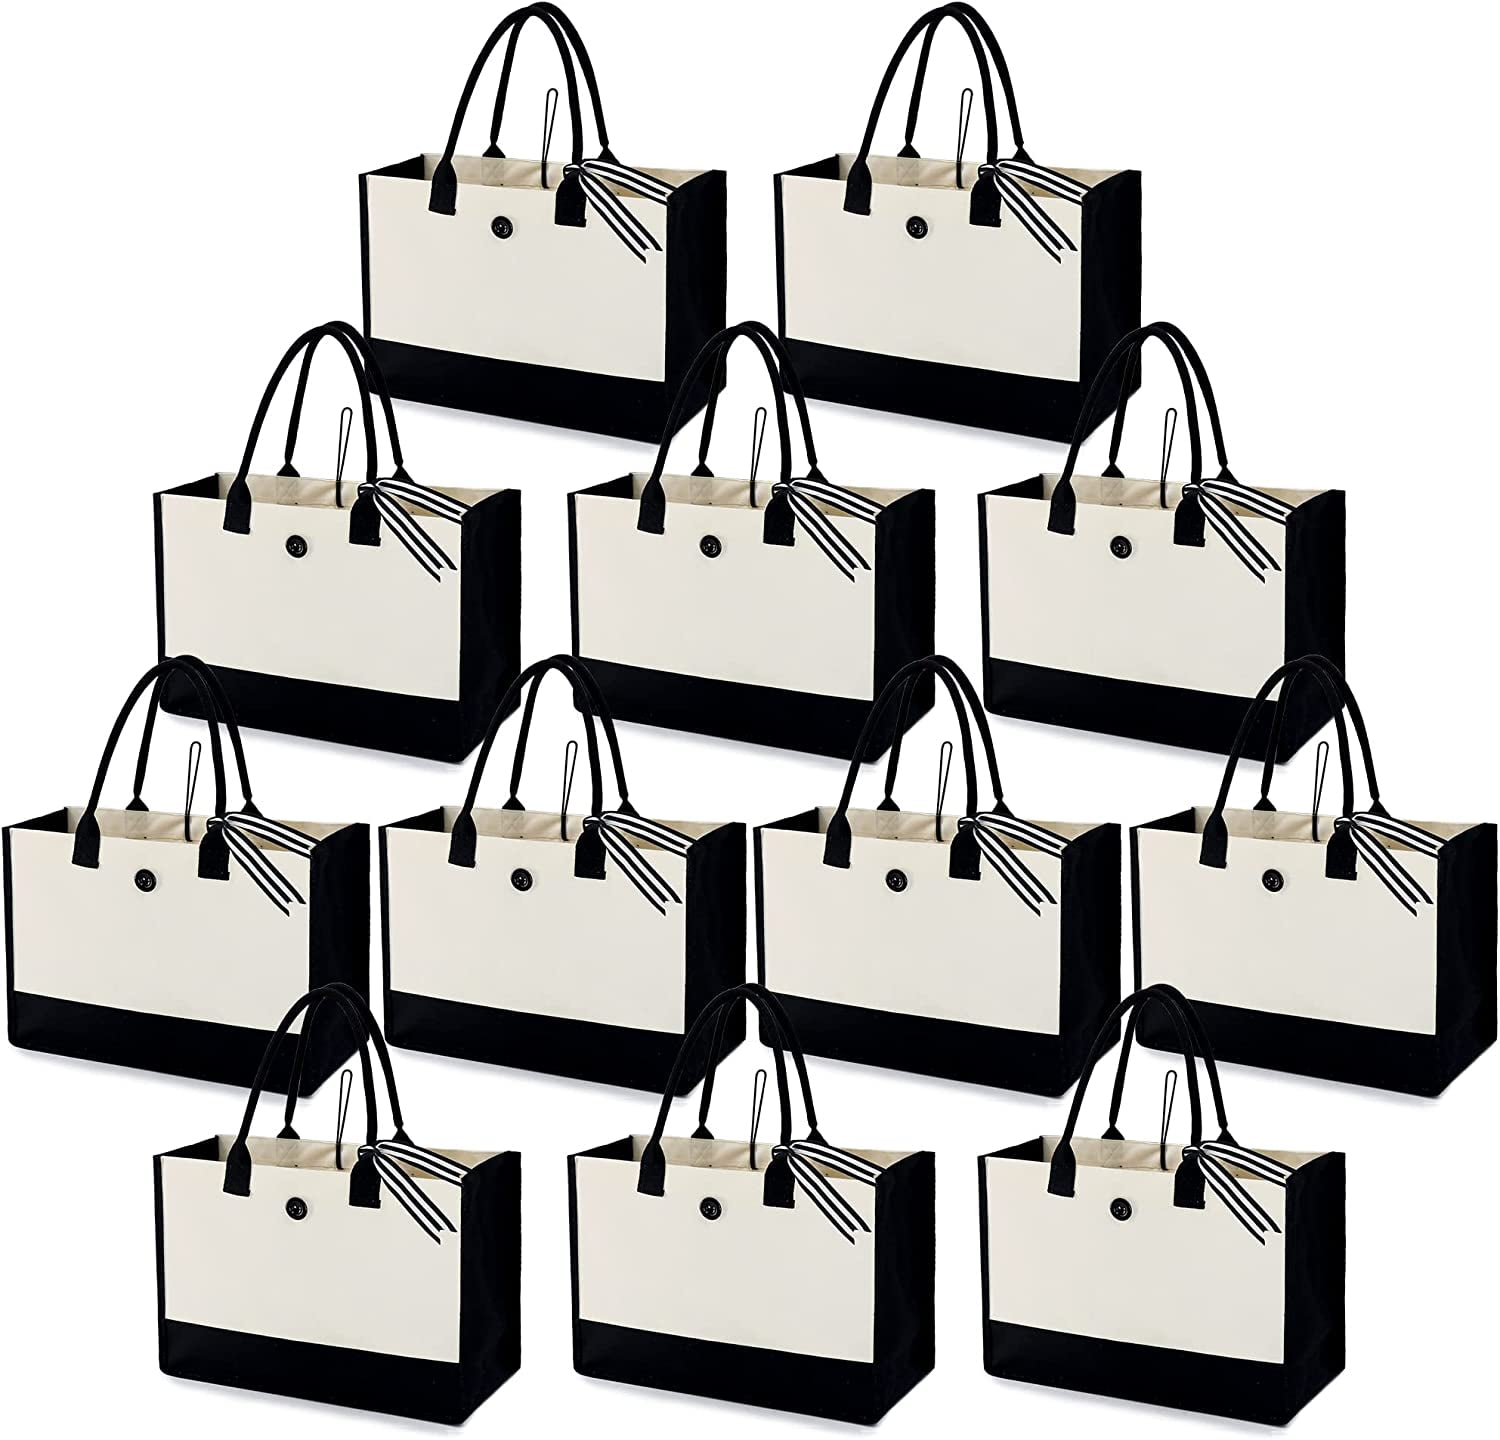 GIFTEXPRESS Pack of 26 Canvas Tote Bag Bulk, Cotton Totes for Embroidery, Crafting Bags, DIY Projects, Bridesmaids Totes, Reusable Grocery Shopping